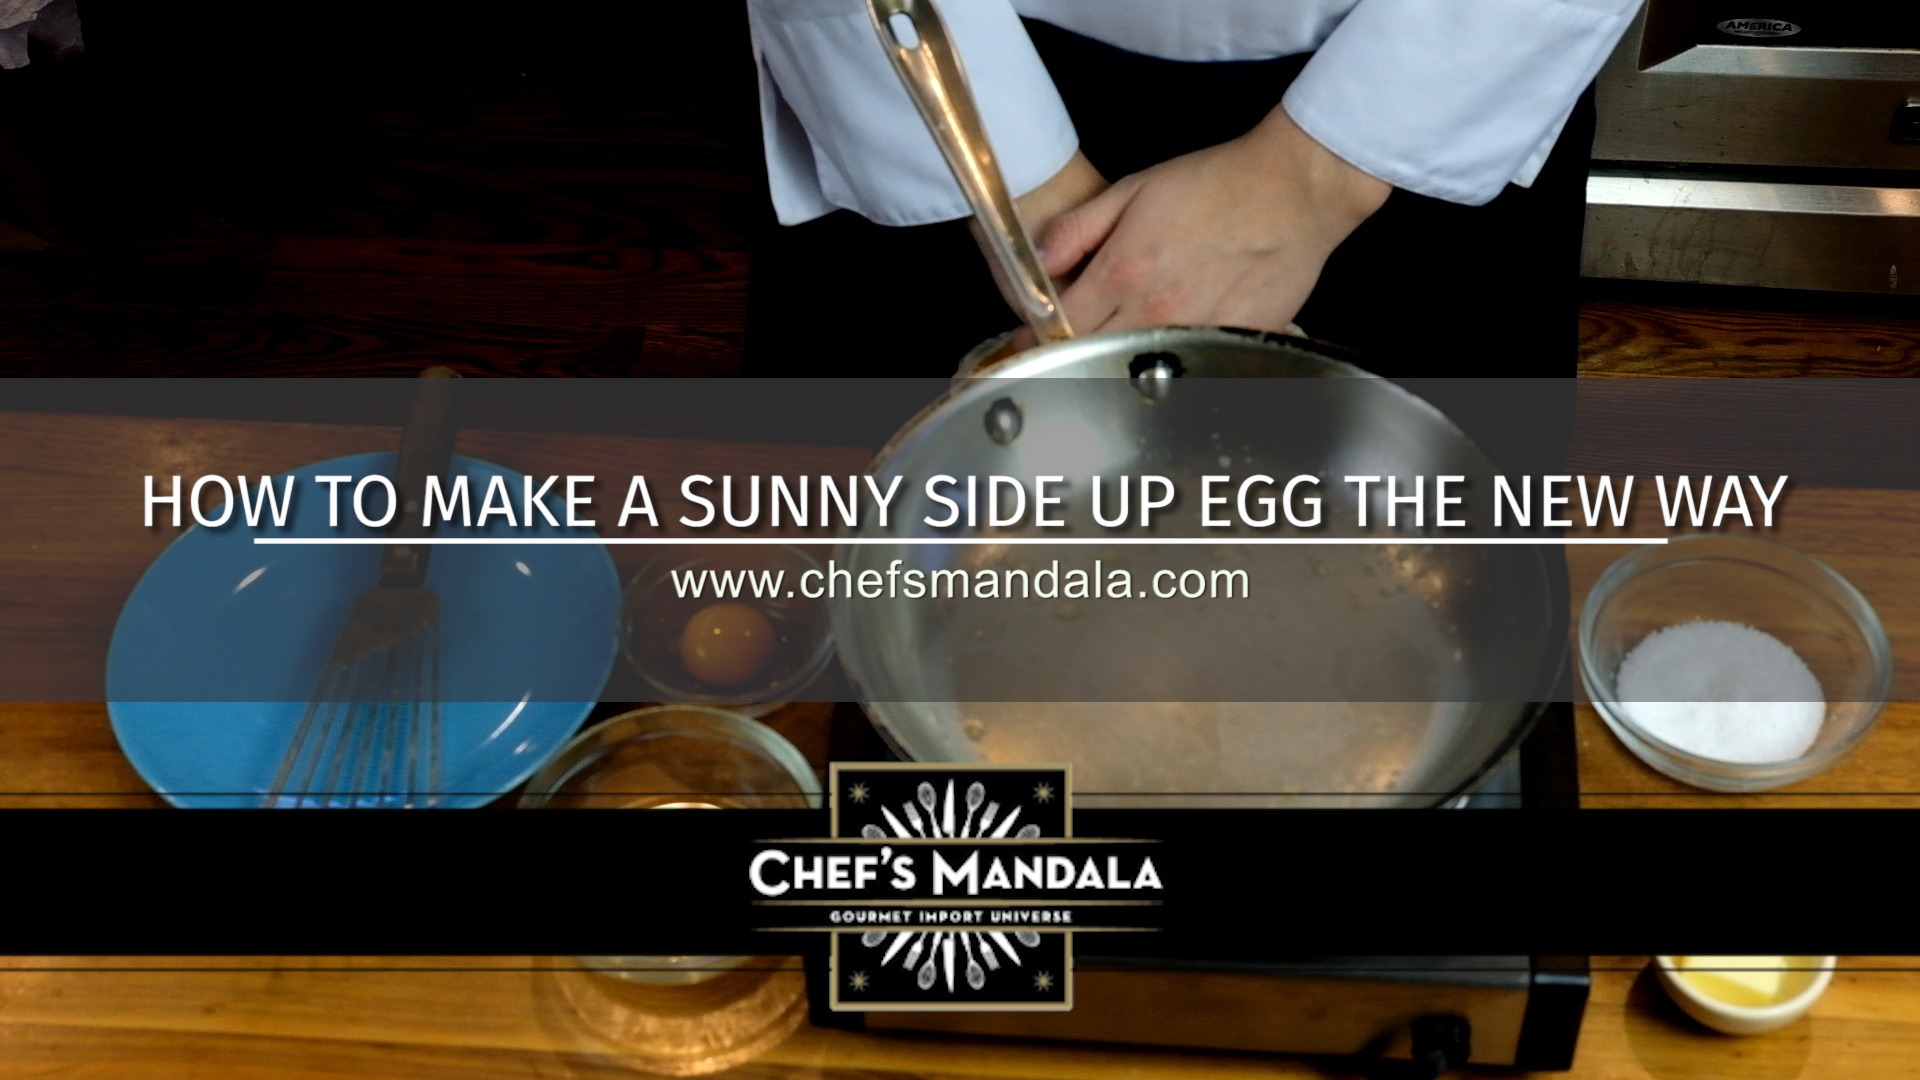 HOW TO MAKE A SUNNY SIDE UP EGG THE NEW WAY